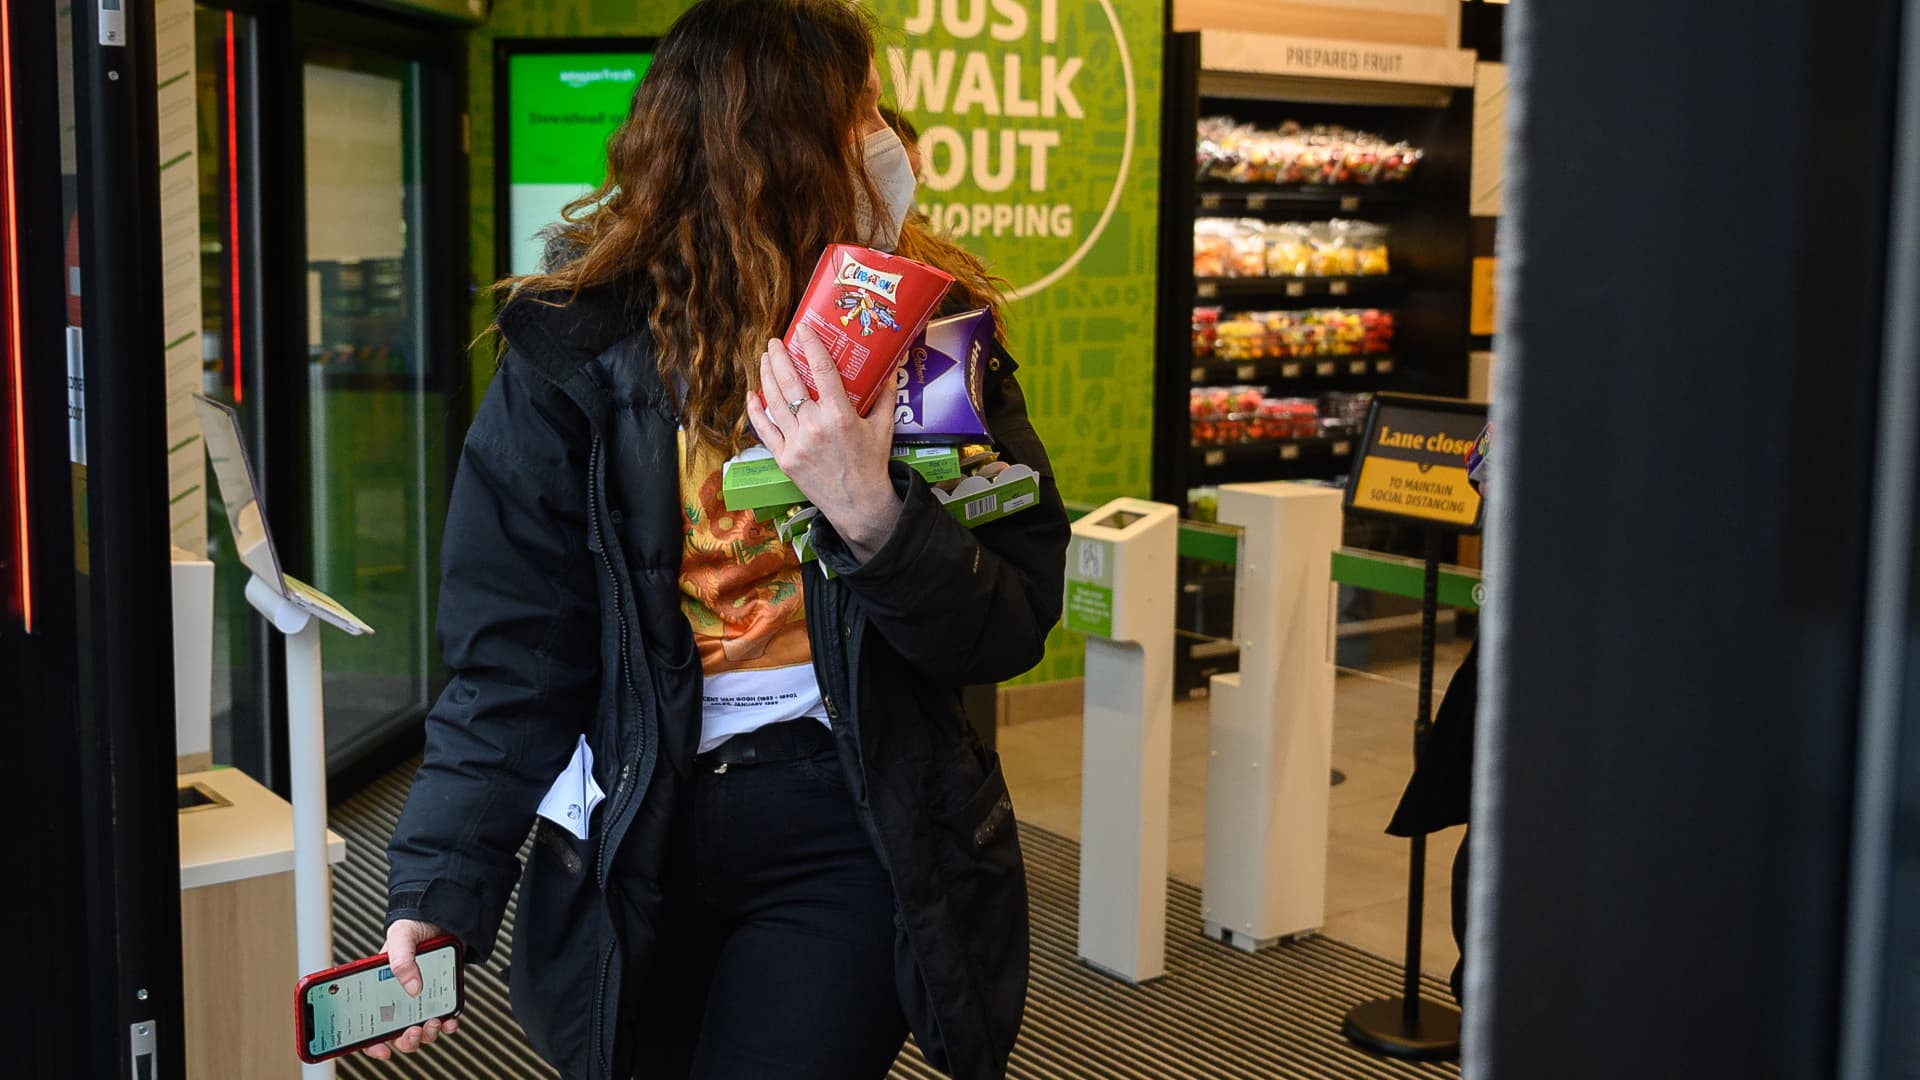 Amazon will now allow cashierless checkout for clothing